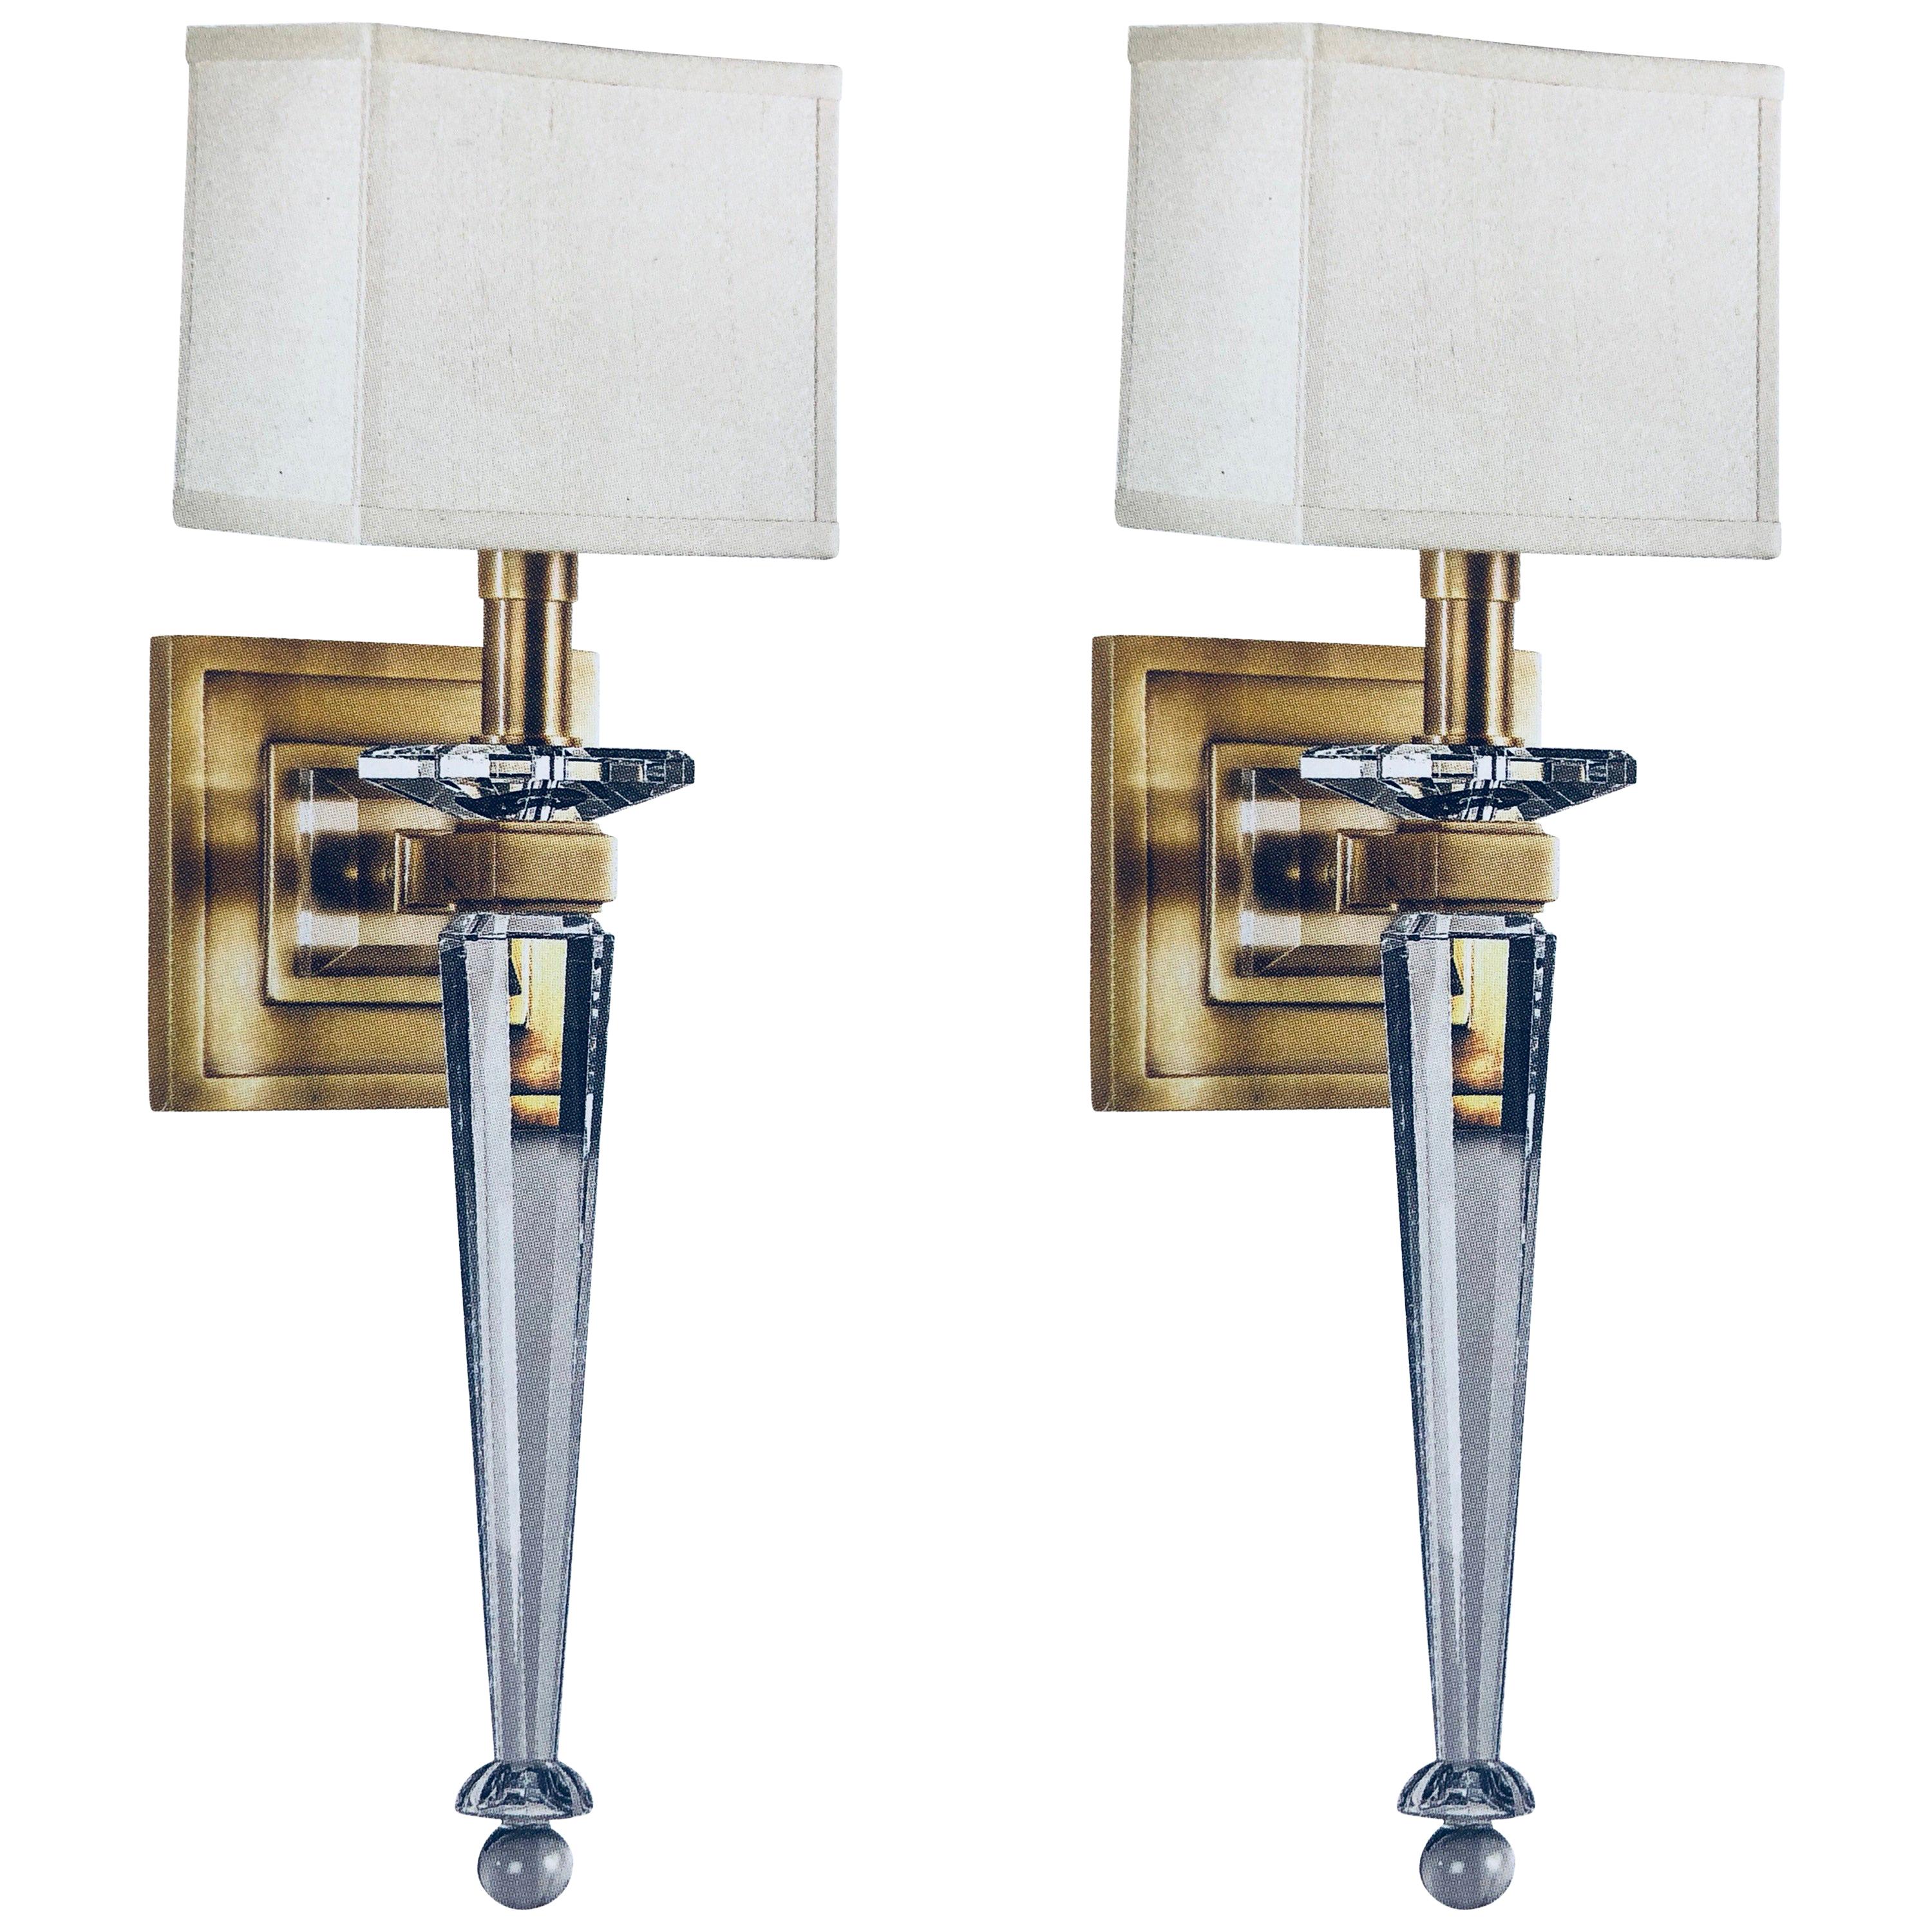 Two Pairs of Mid-Century Modern Crystal and Brass Sconces, style of Andre Arbus